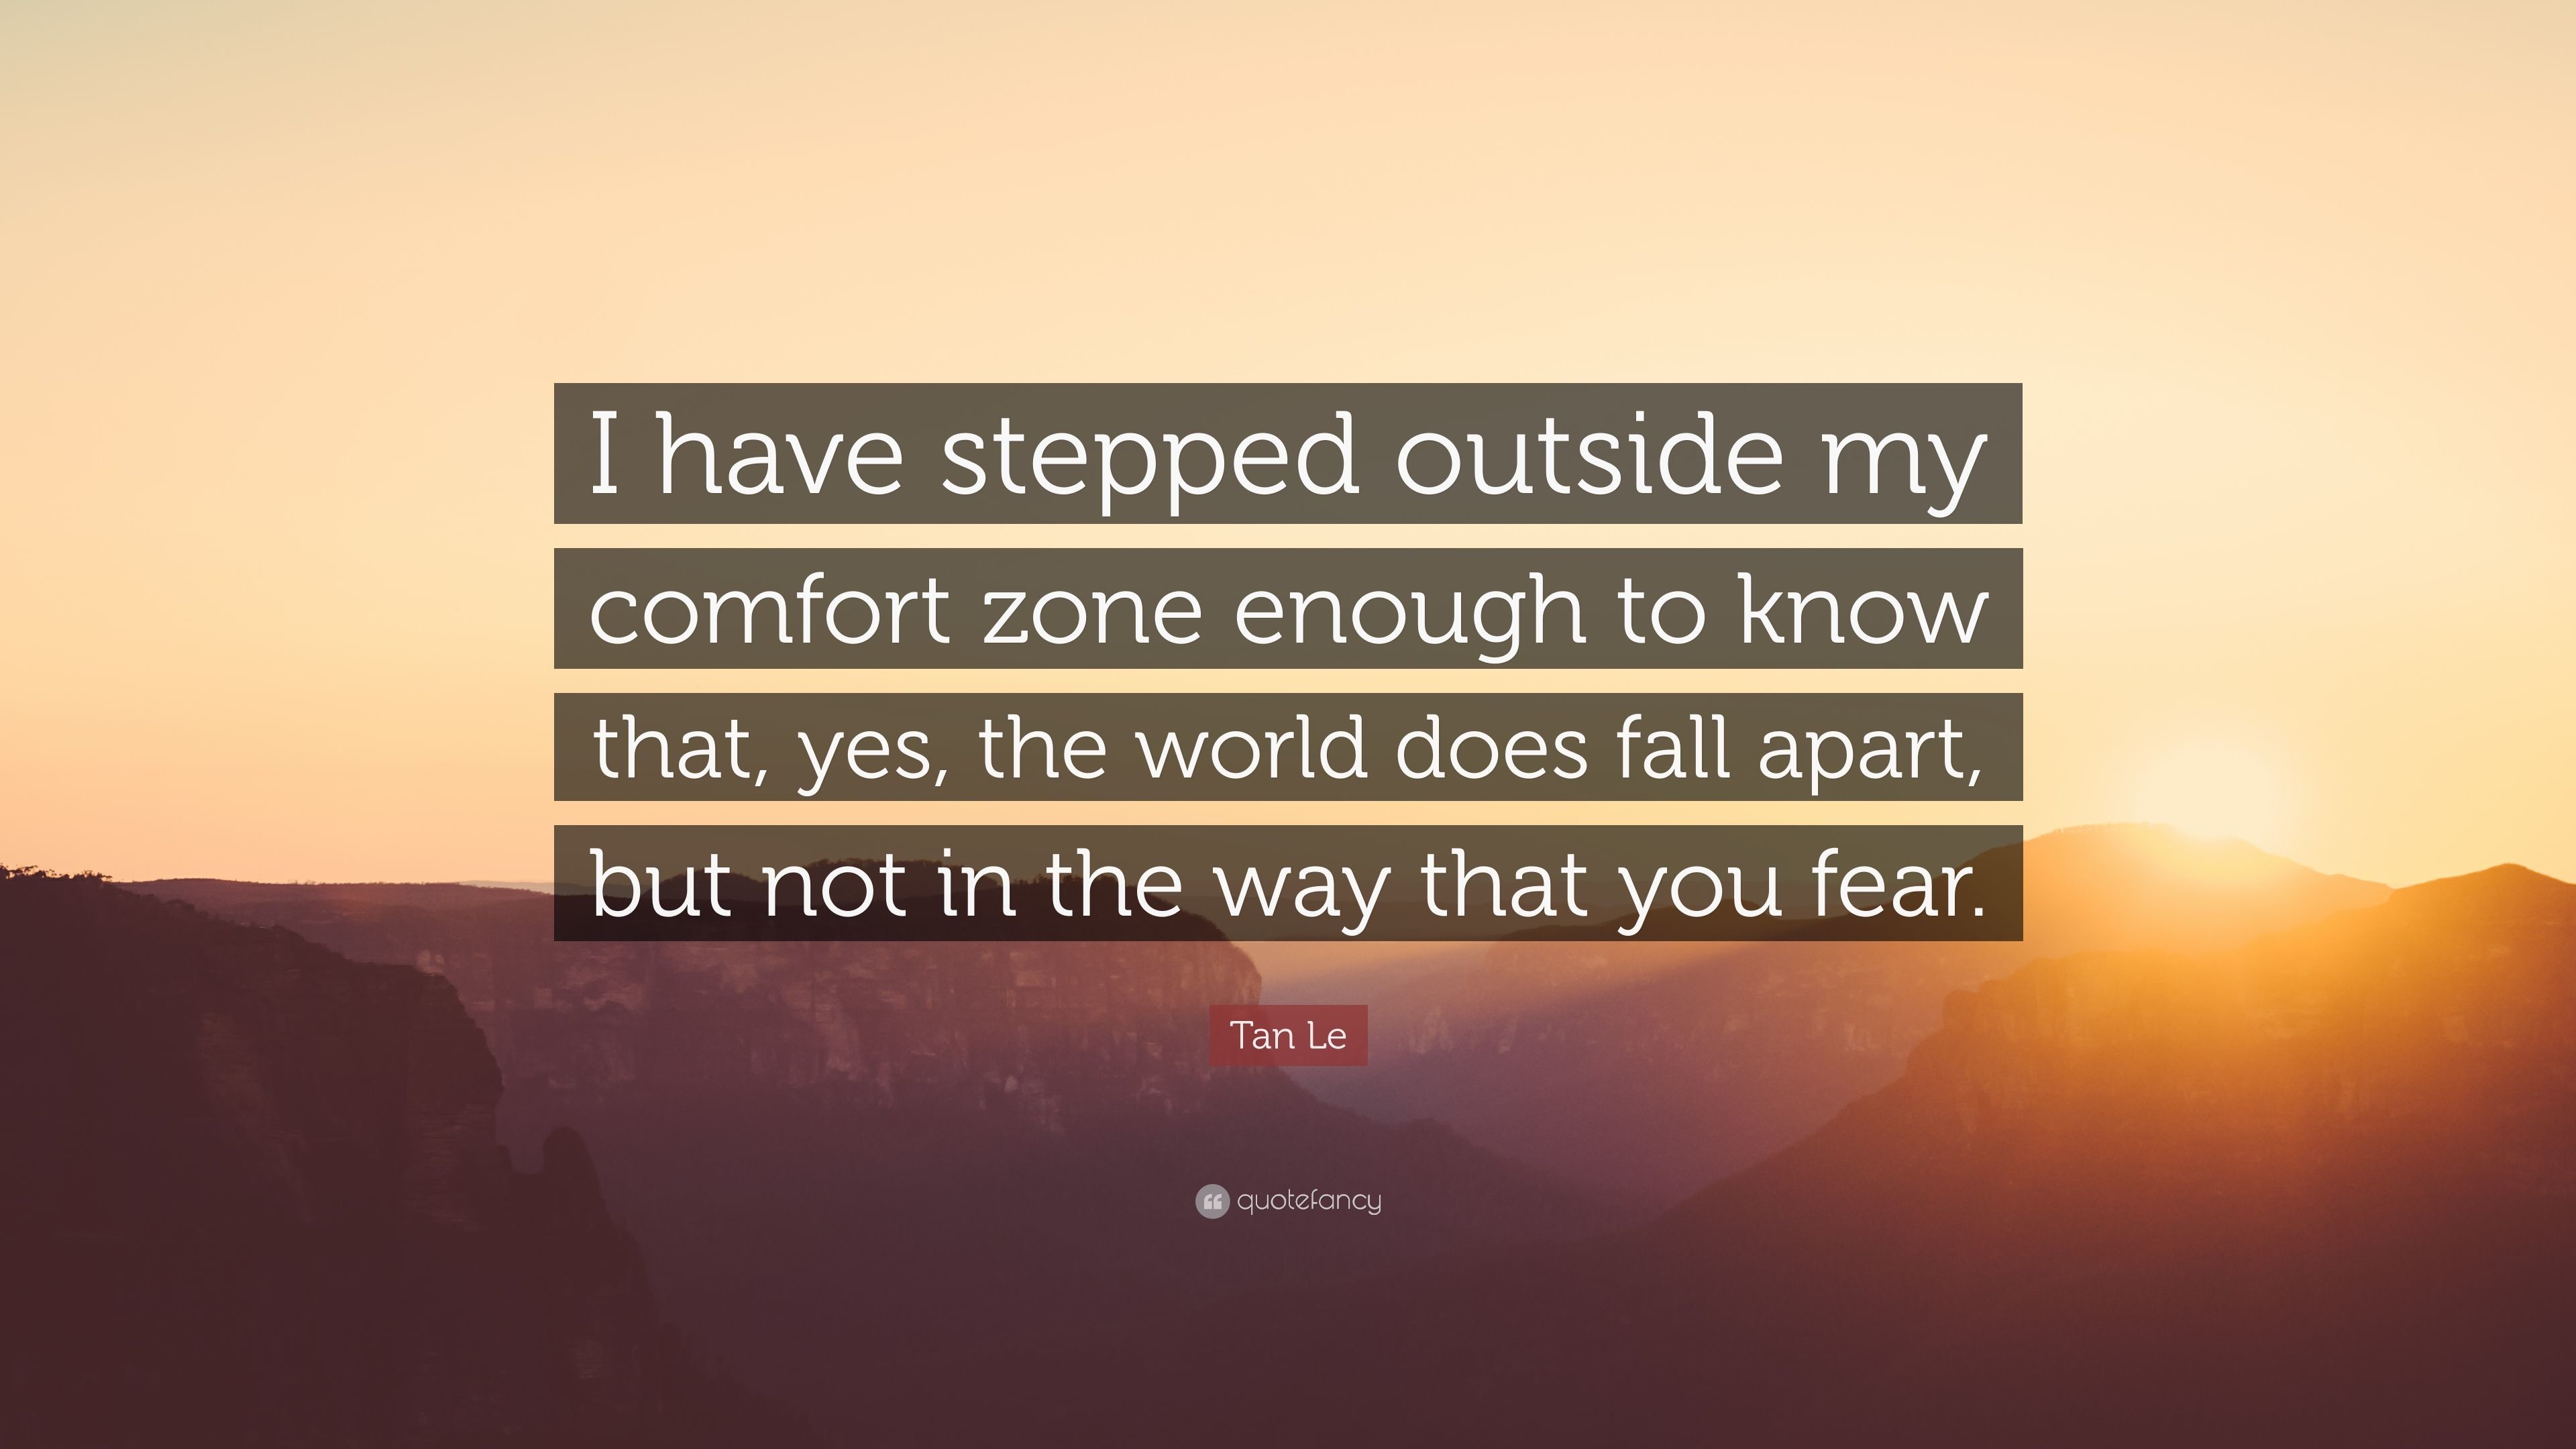 3840x2160 Tan Le Quote: "I have stepped outside my comfort zone enough...